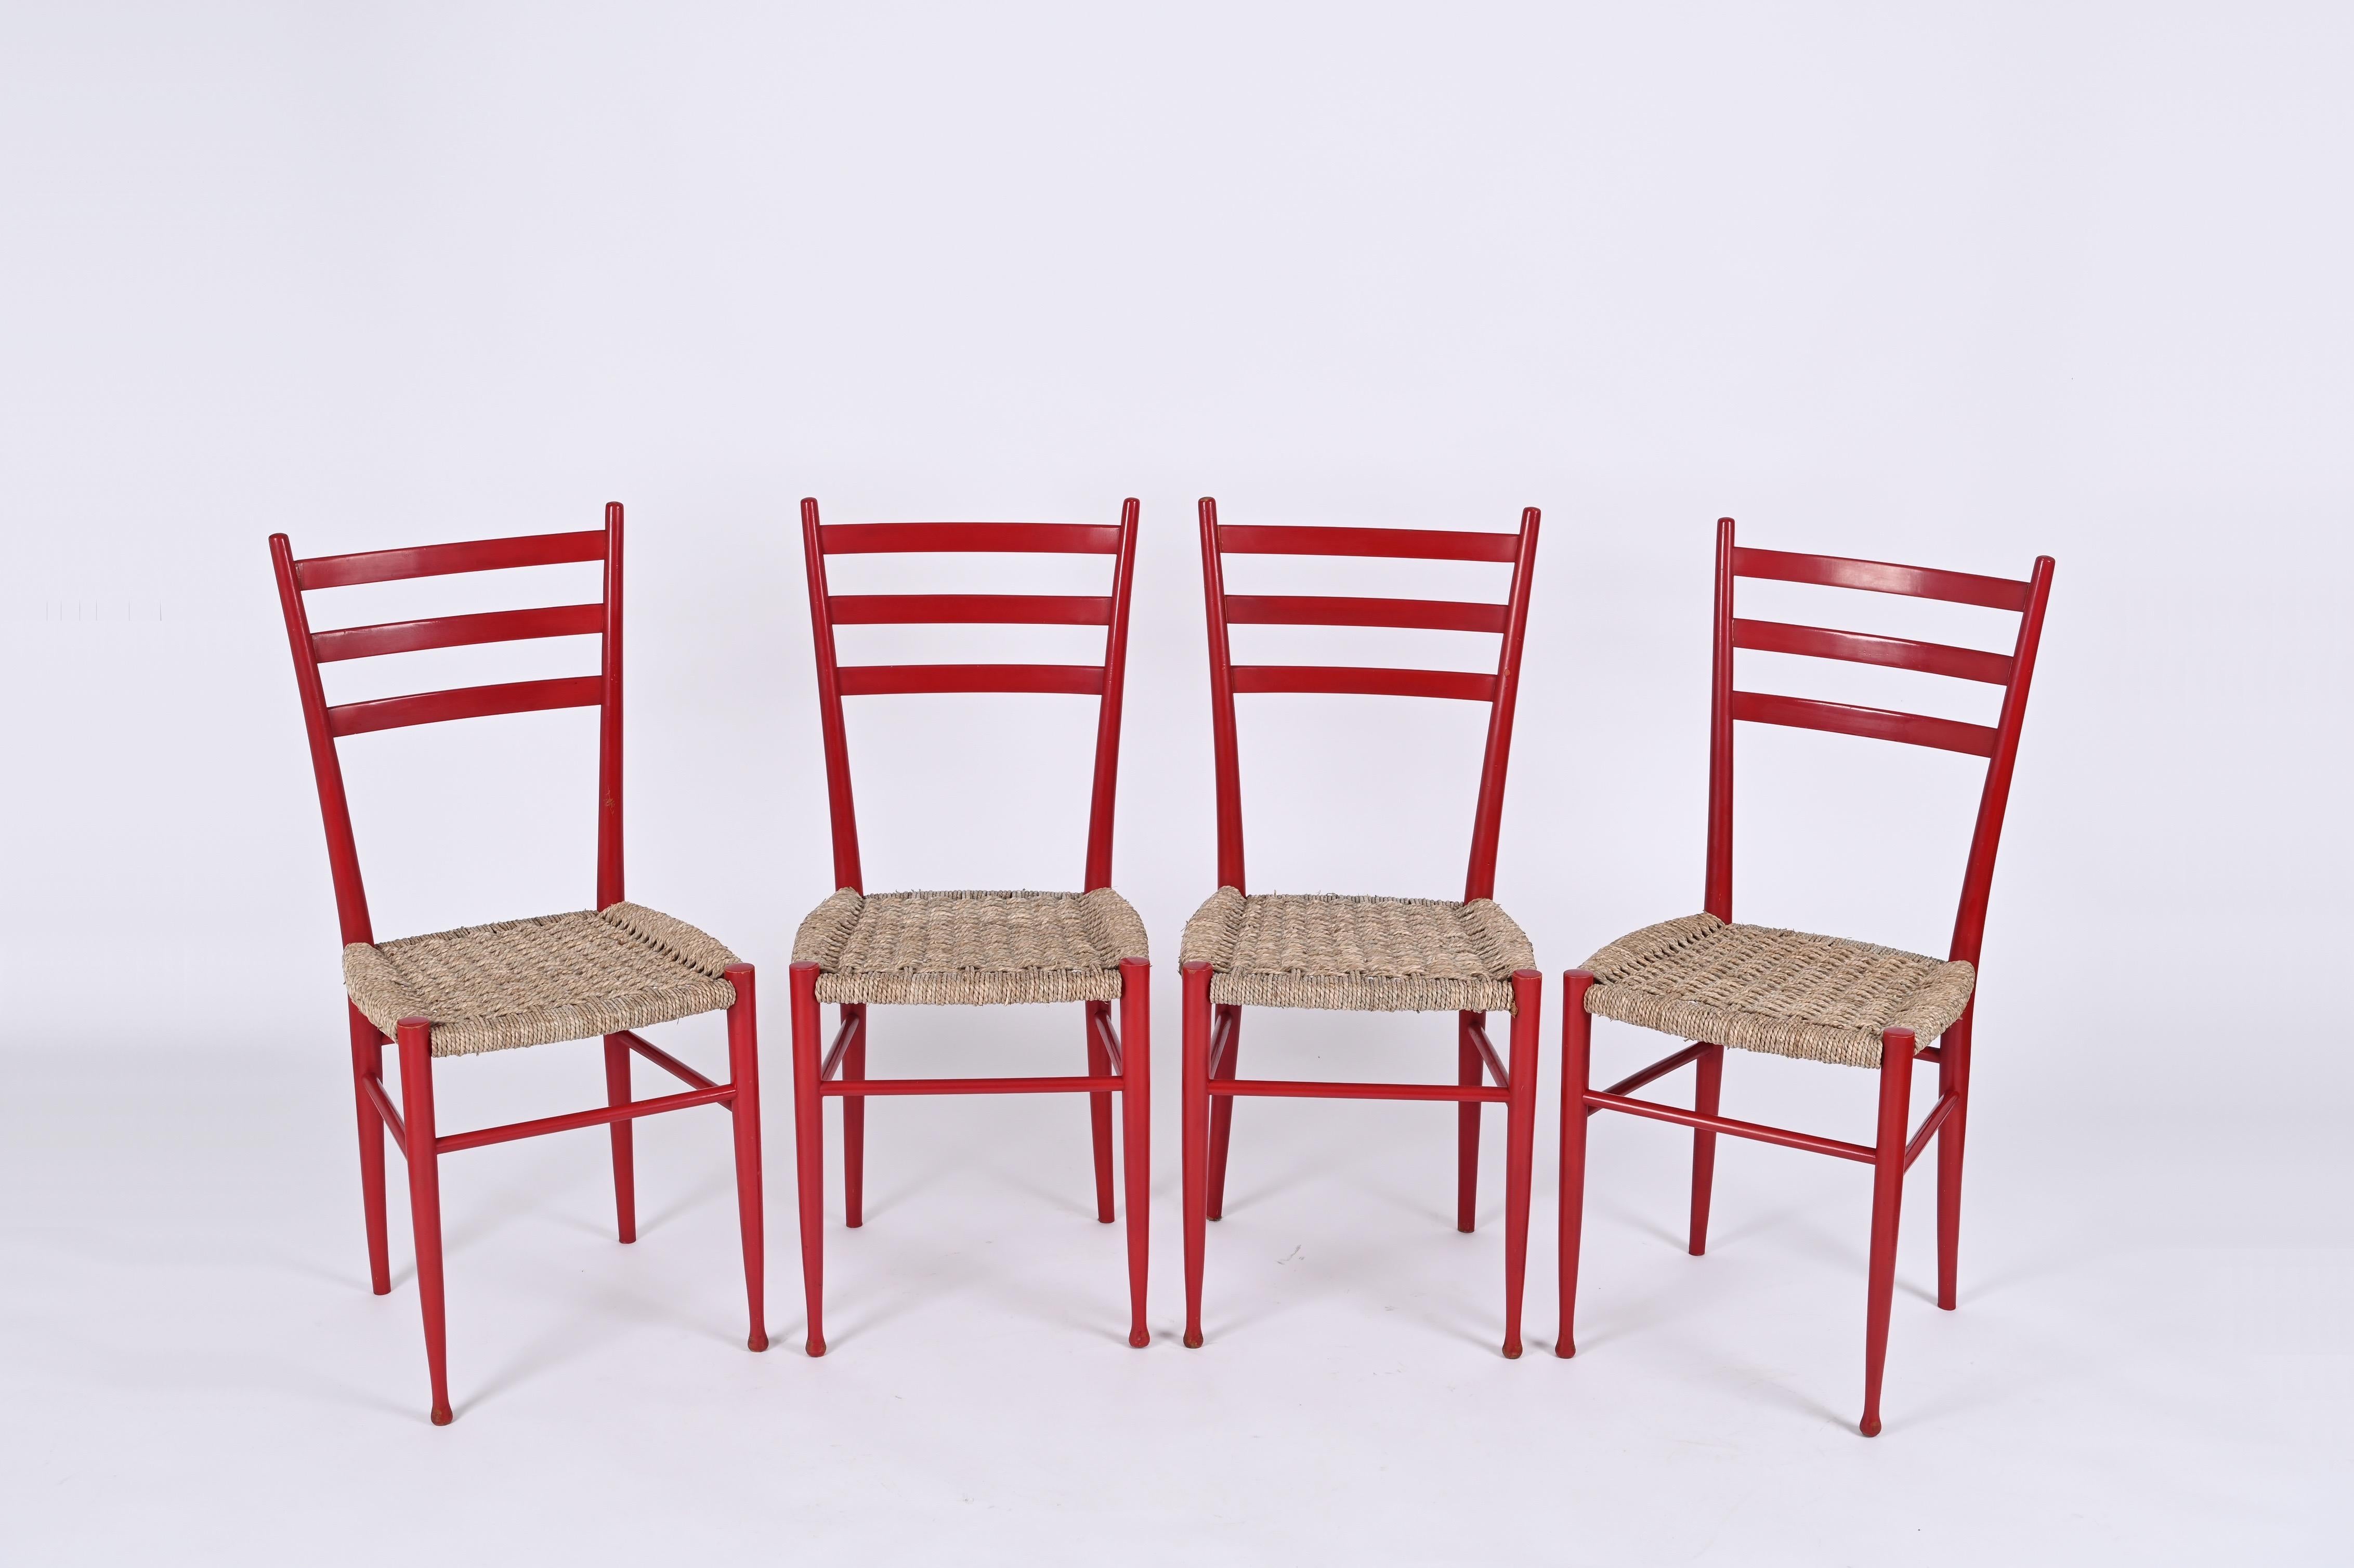 Set of 4 Chiavarine Chairs in Red Stained Beech and Bamboo Rope, Italy 1950s For Sale 9